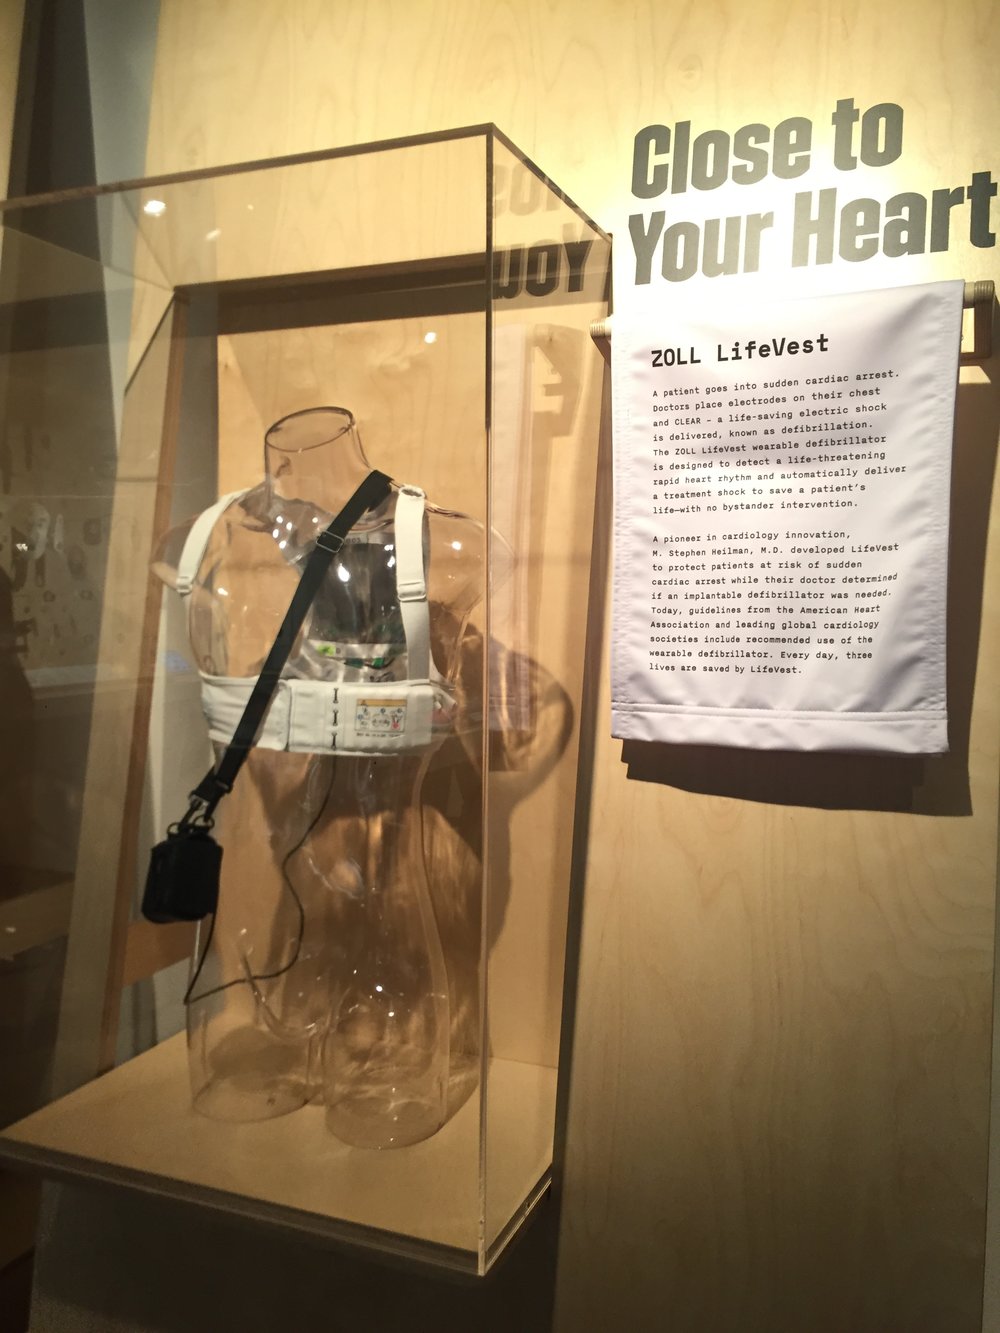  A wearable defibrillator that’s currently saving lives, developed by Dr. M. Stephen Heilman. 